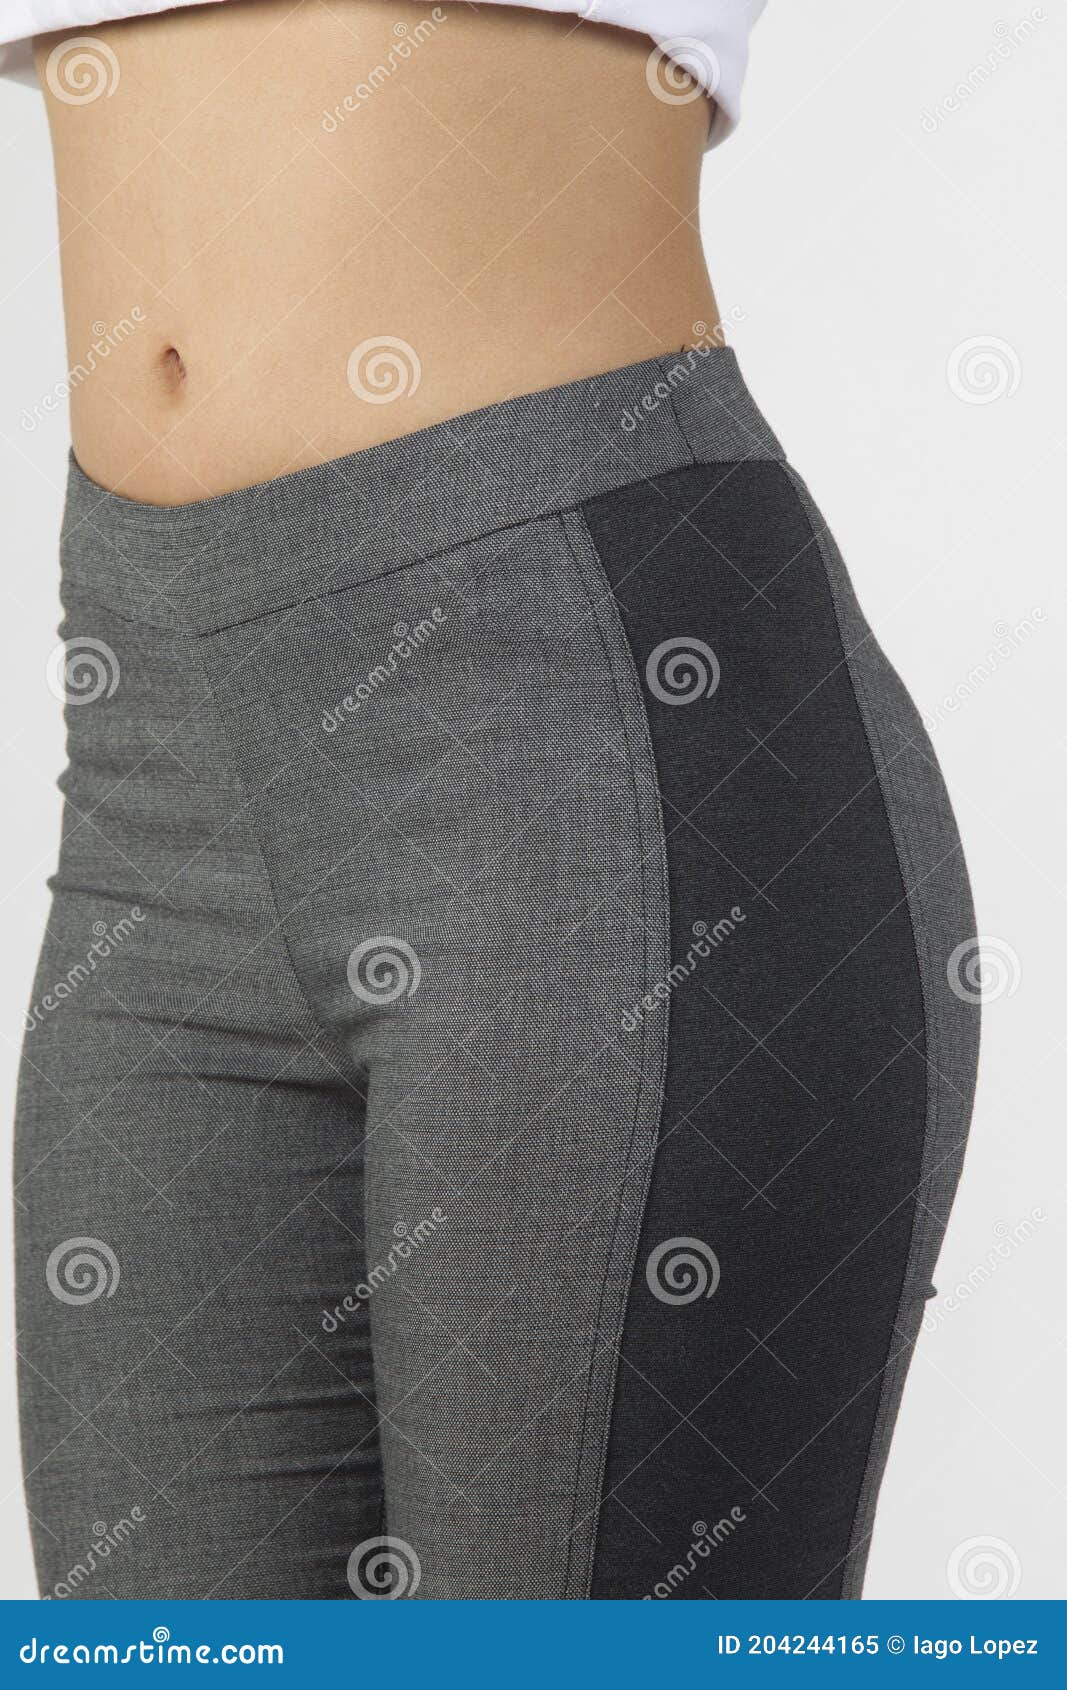 120+ Cellulite Leggings Stock Photos, Pictures & Royalty-Free